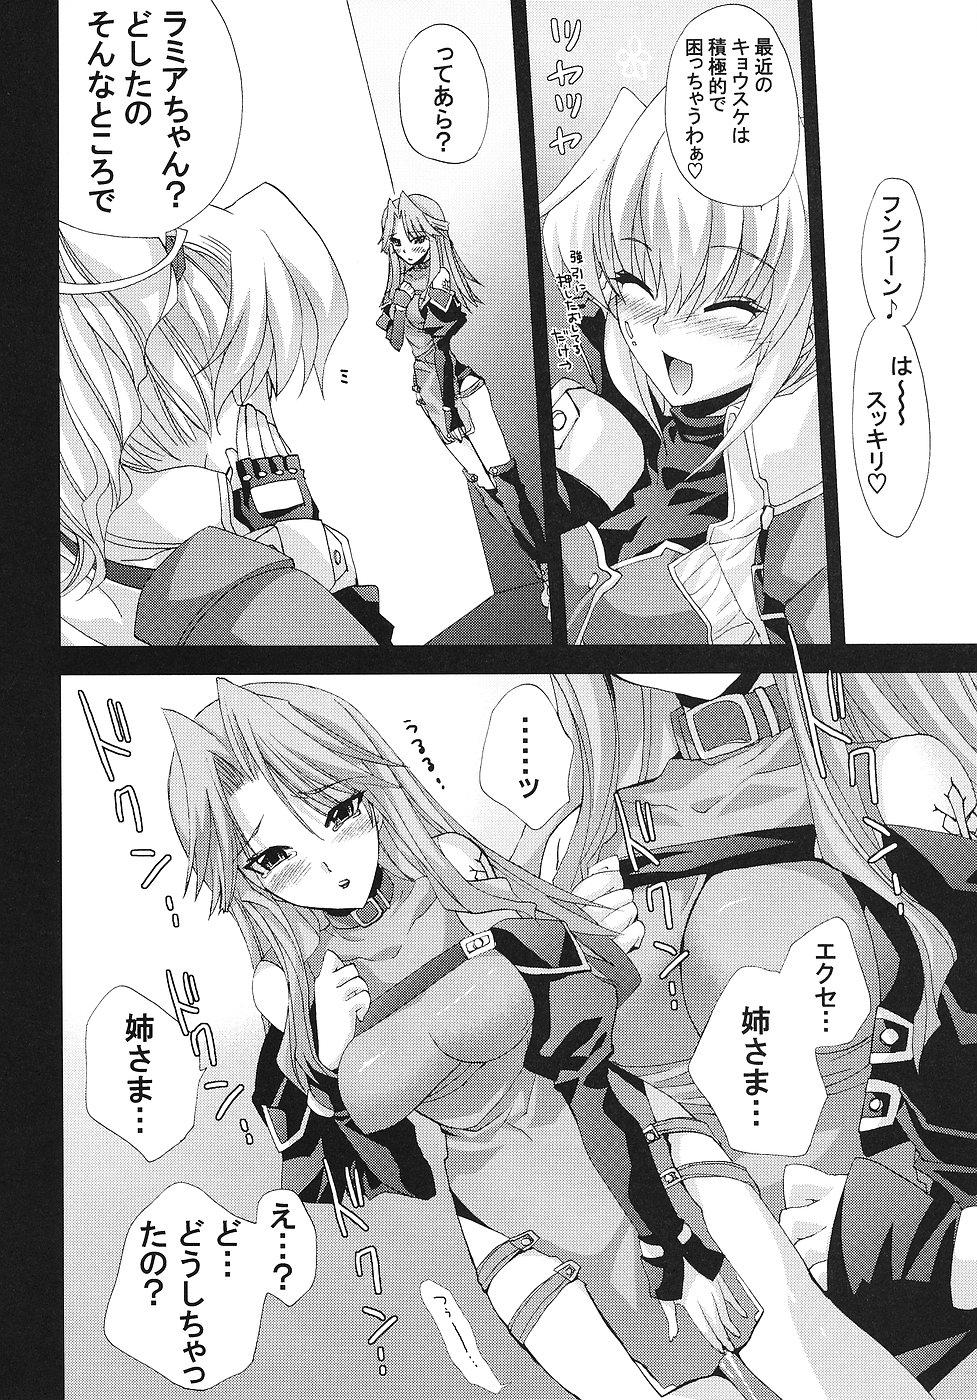 Hot Girl Night and day - Super robot wars Masseur - Page 5